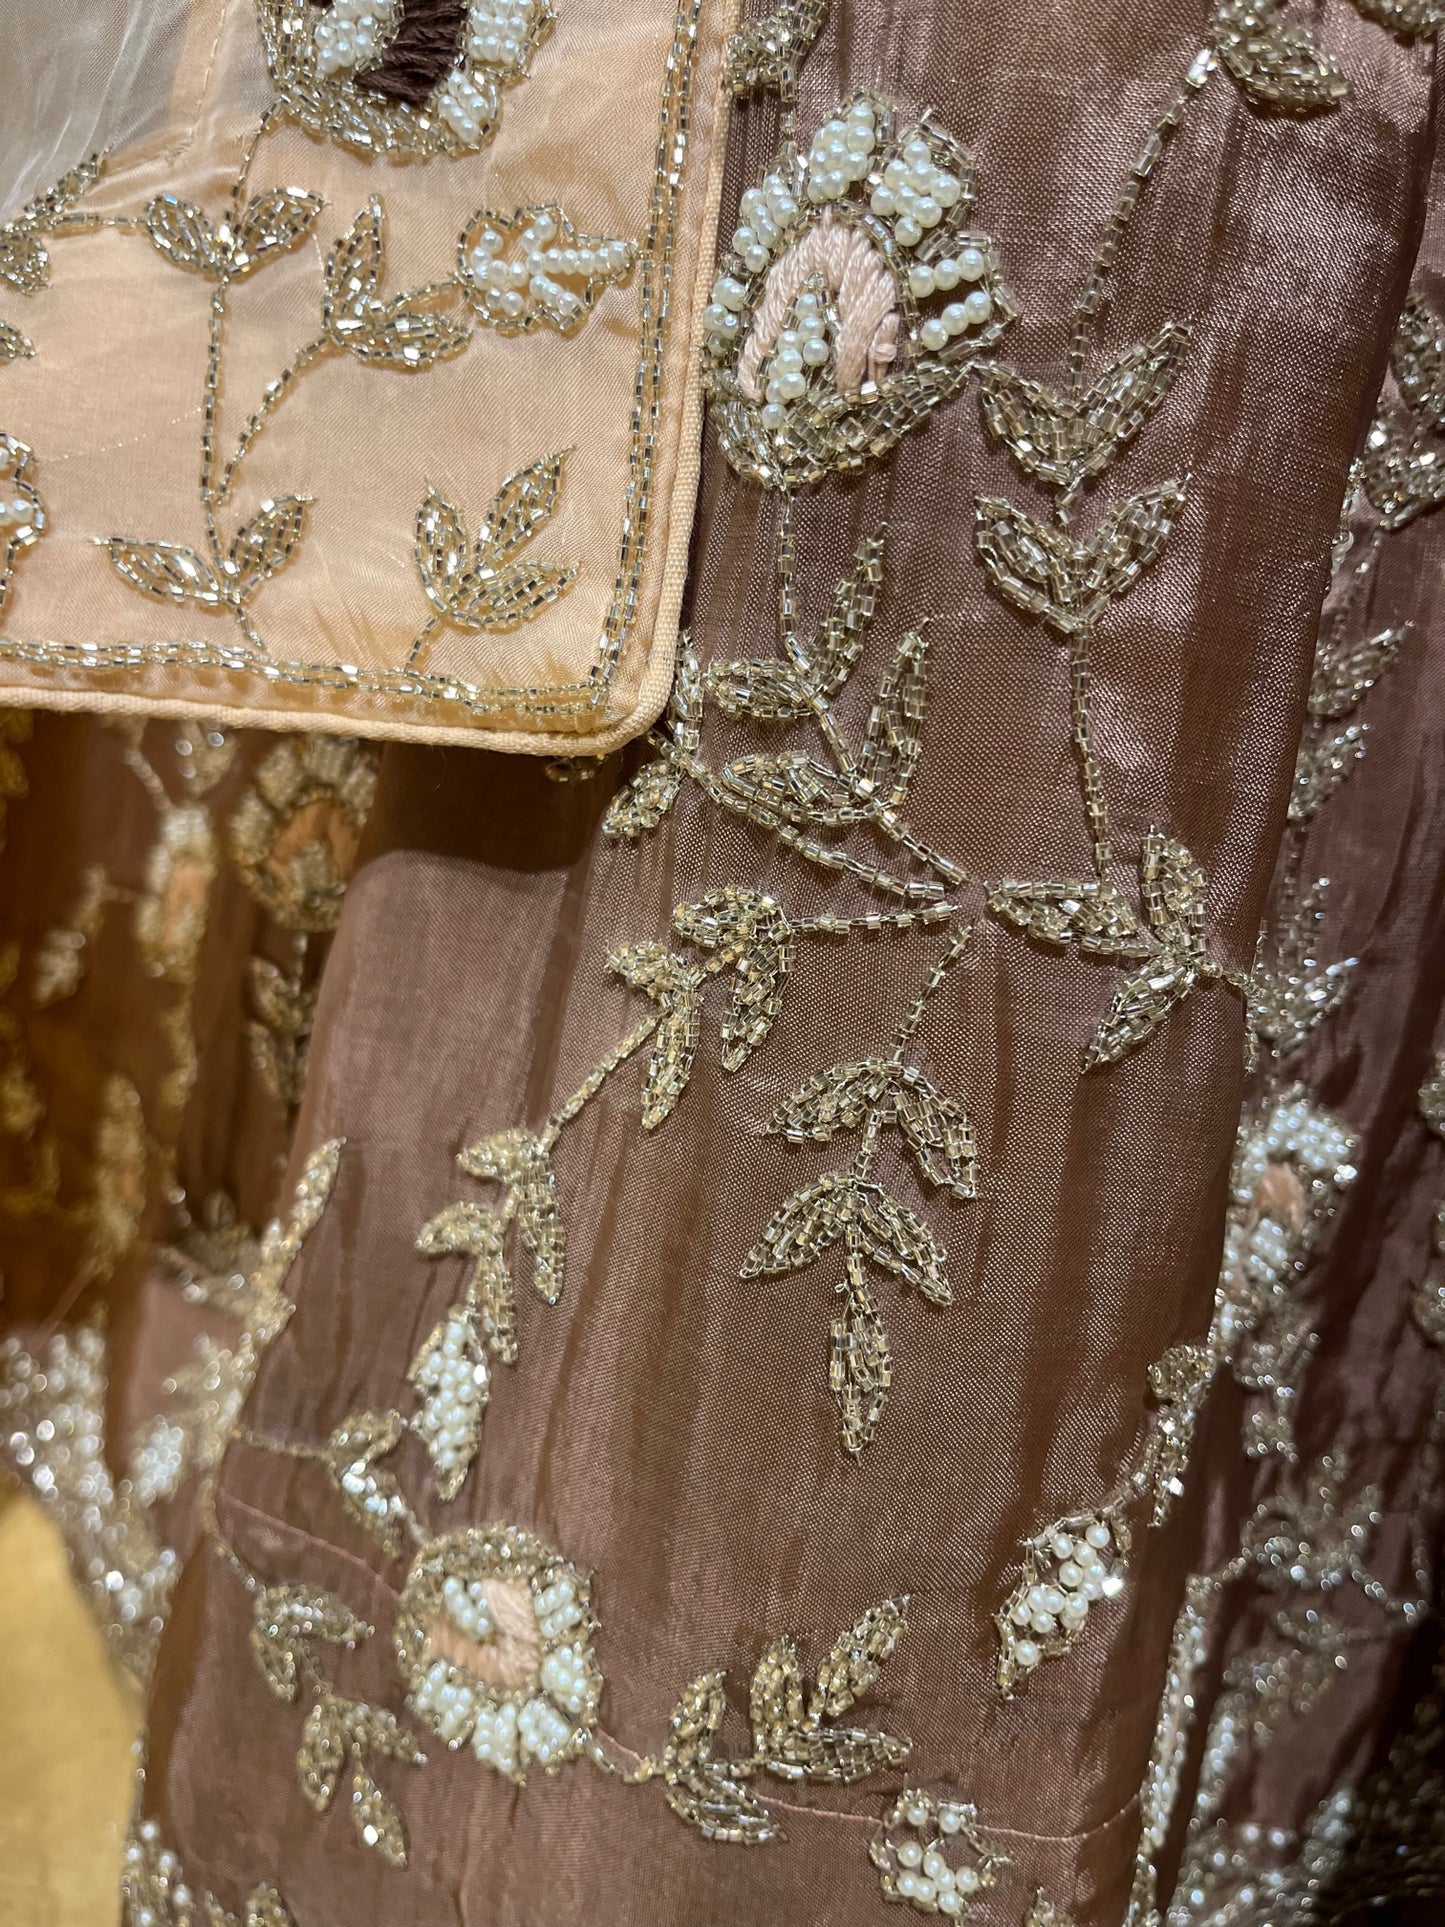 BRIDESMAIDS READYMADE BROWN COLOUR SHADED LEHENGA, UNSTITCHED BLOUSE WITH ORGANZA DUPATTA EMBELLISHED WITH CUTDANA WORK